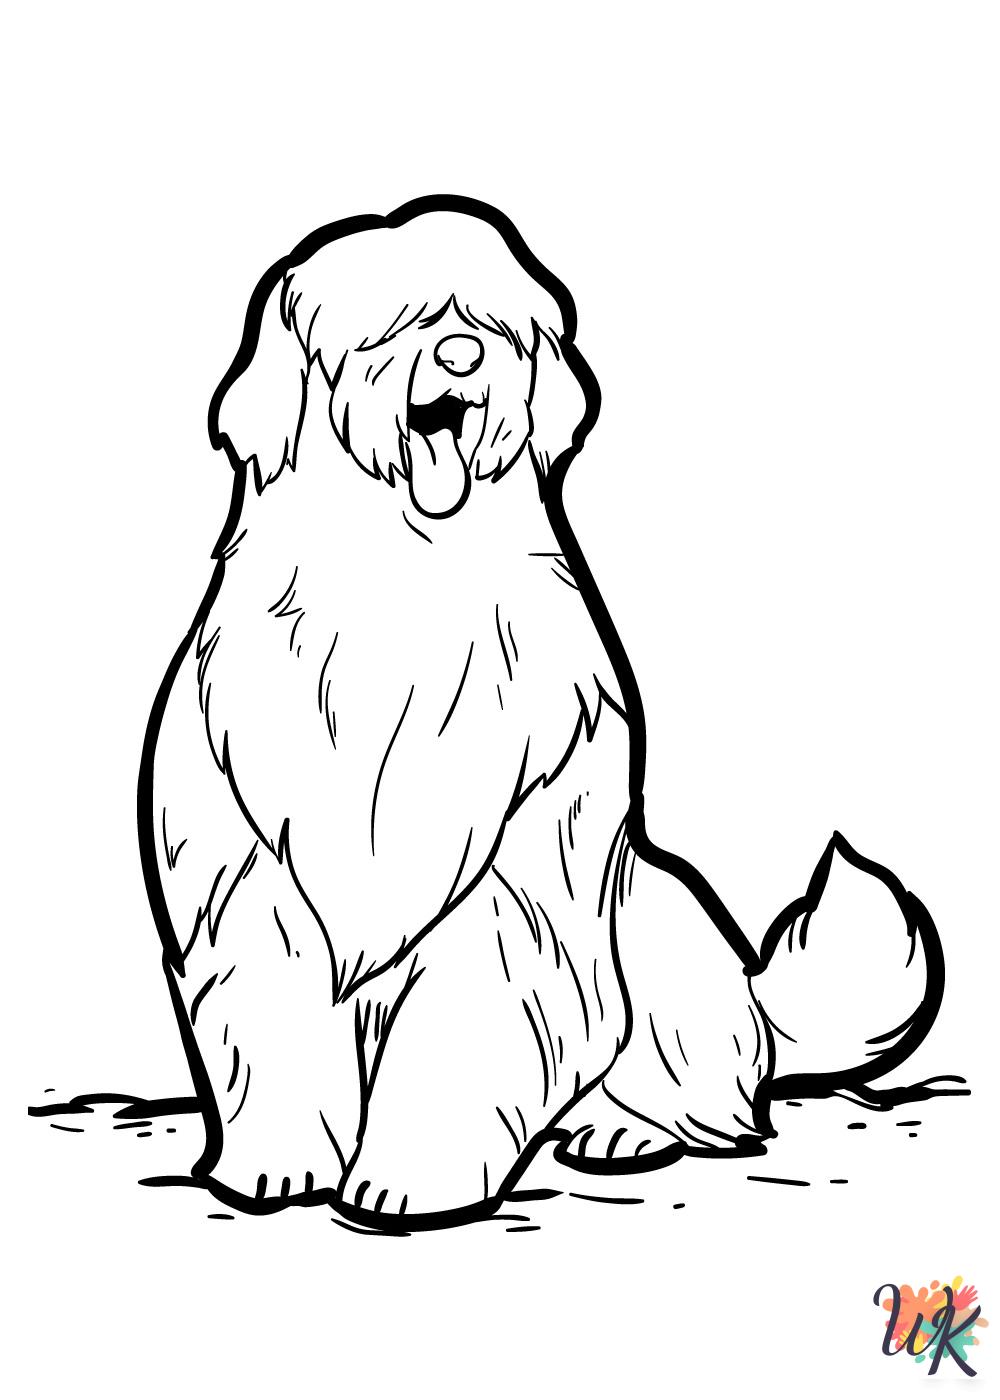 free printable Dogs coloring pages